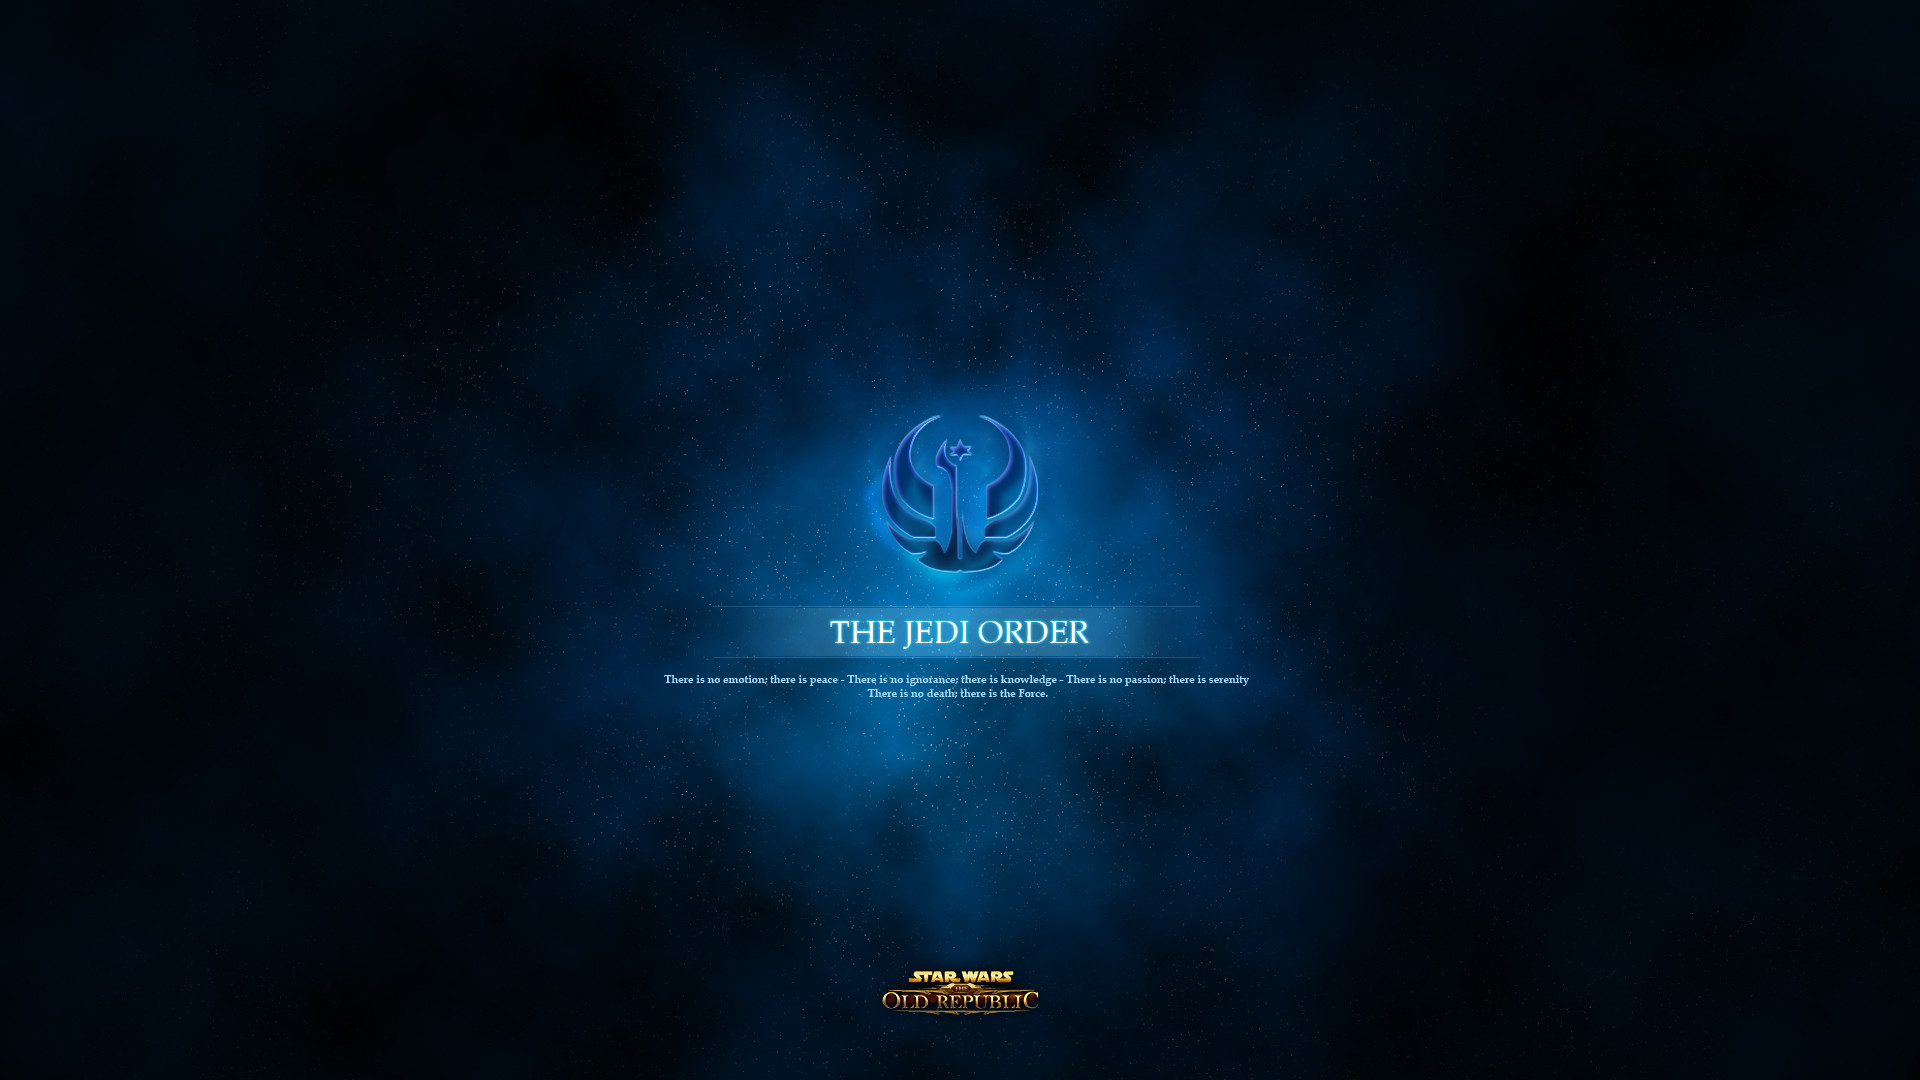 Video Game – Star Wars The Old Republic Wallpaper